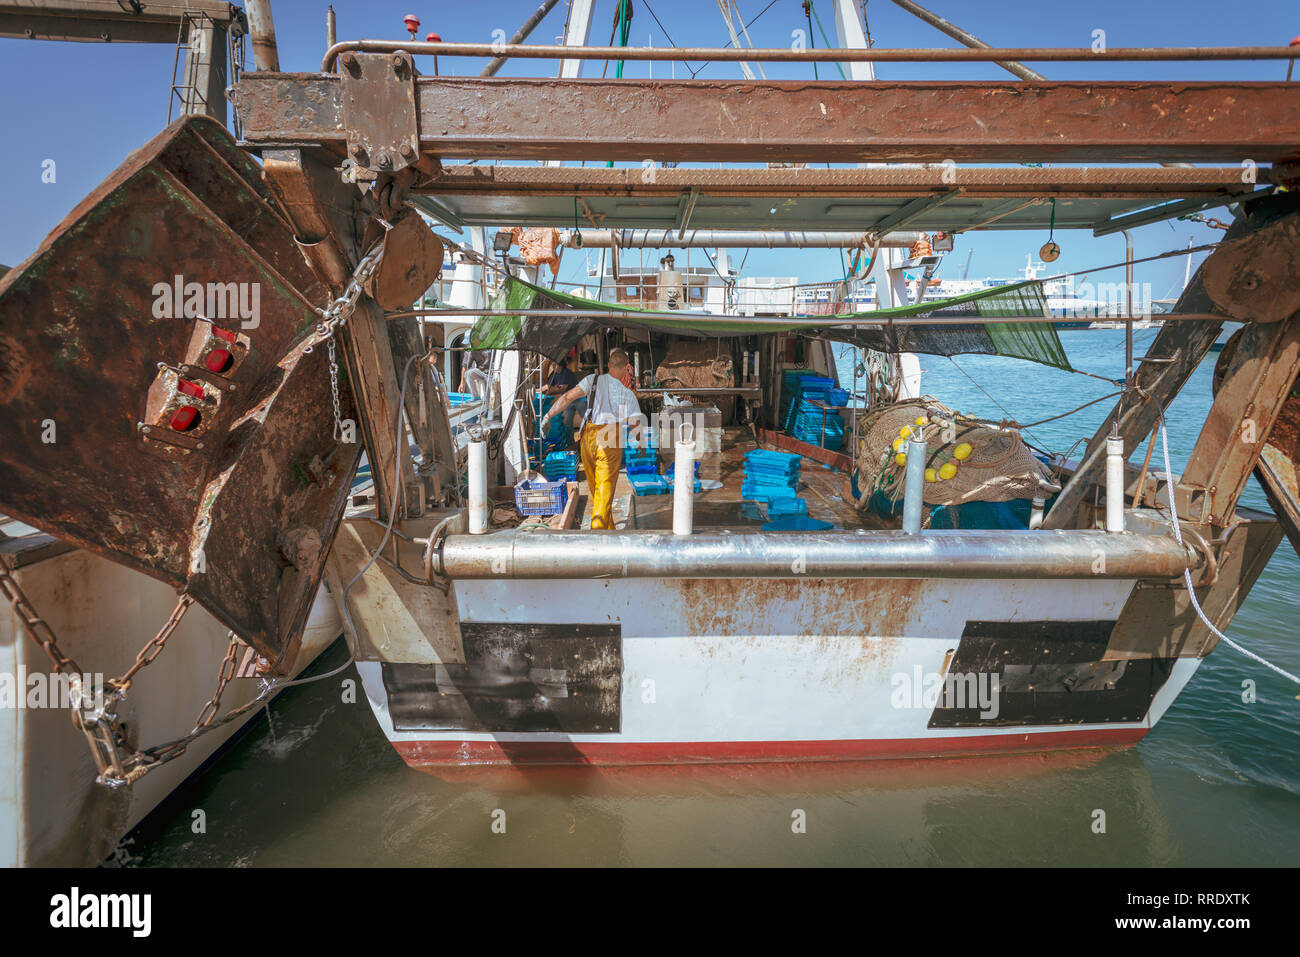 A fisherman wearing yellow overalls tidies up equipment on the deck of a fishing trawler at the port in Denia, Spain. Stock Photo